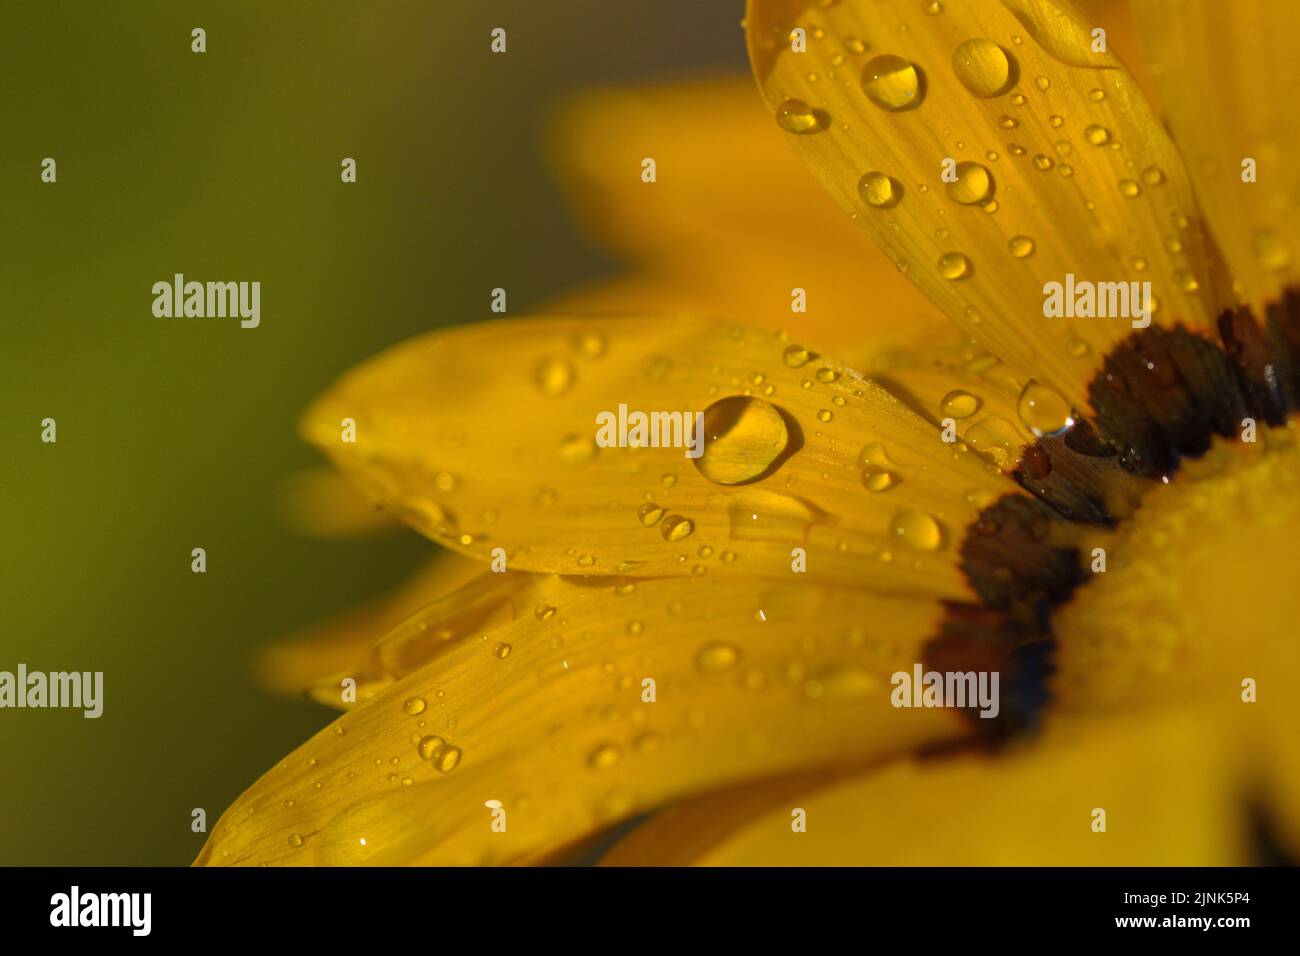 Macro photography of a yellow flower with water drops Stock Photo